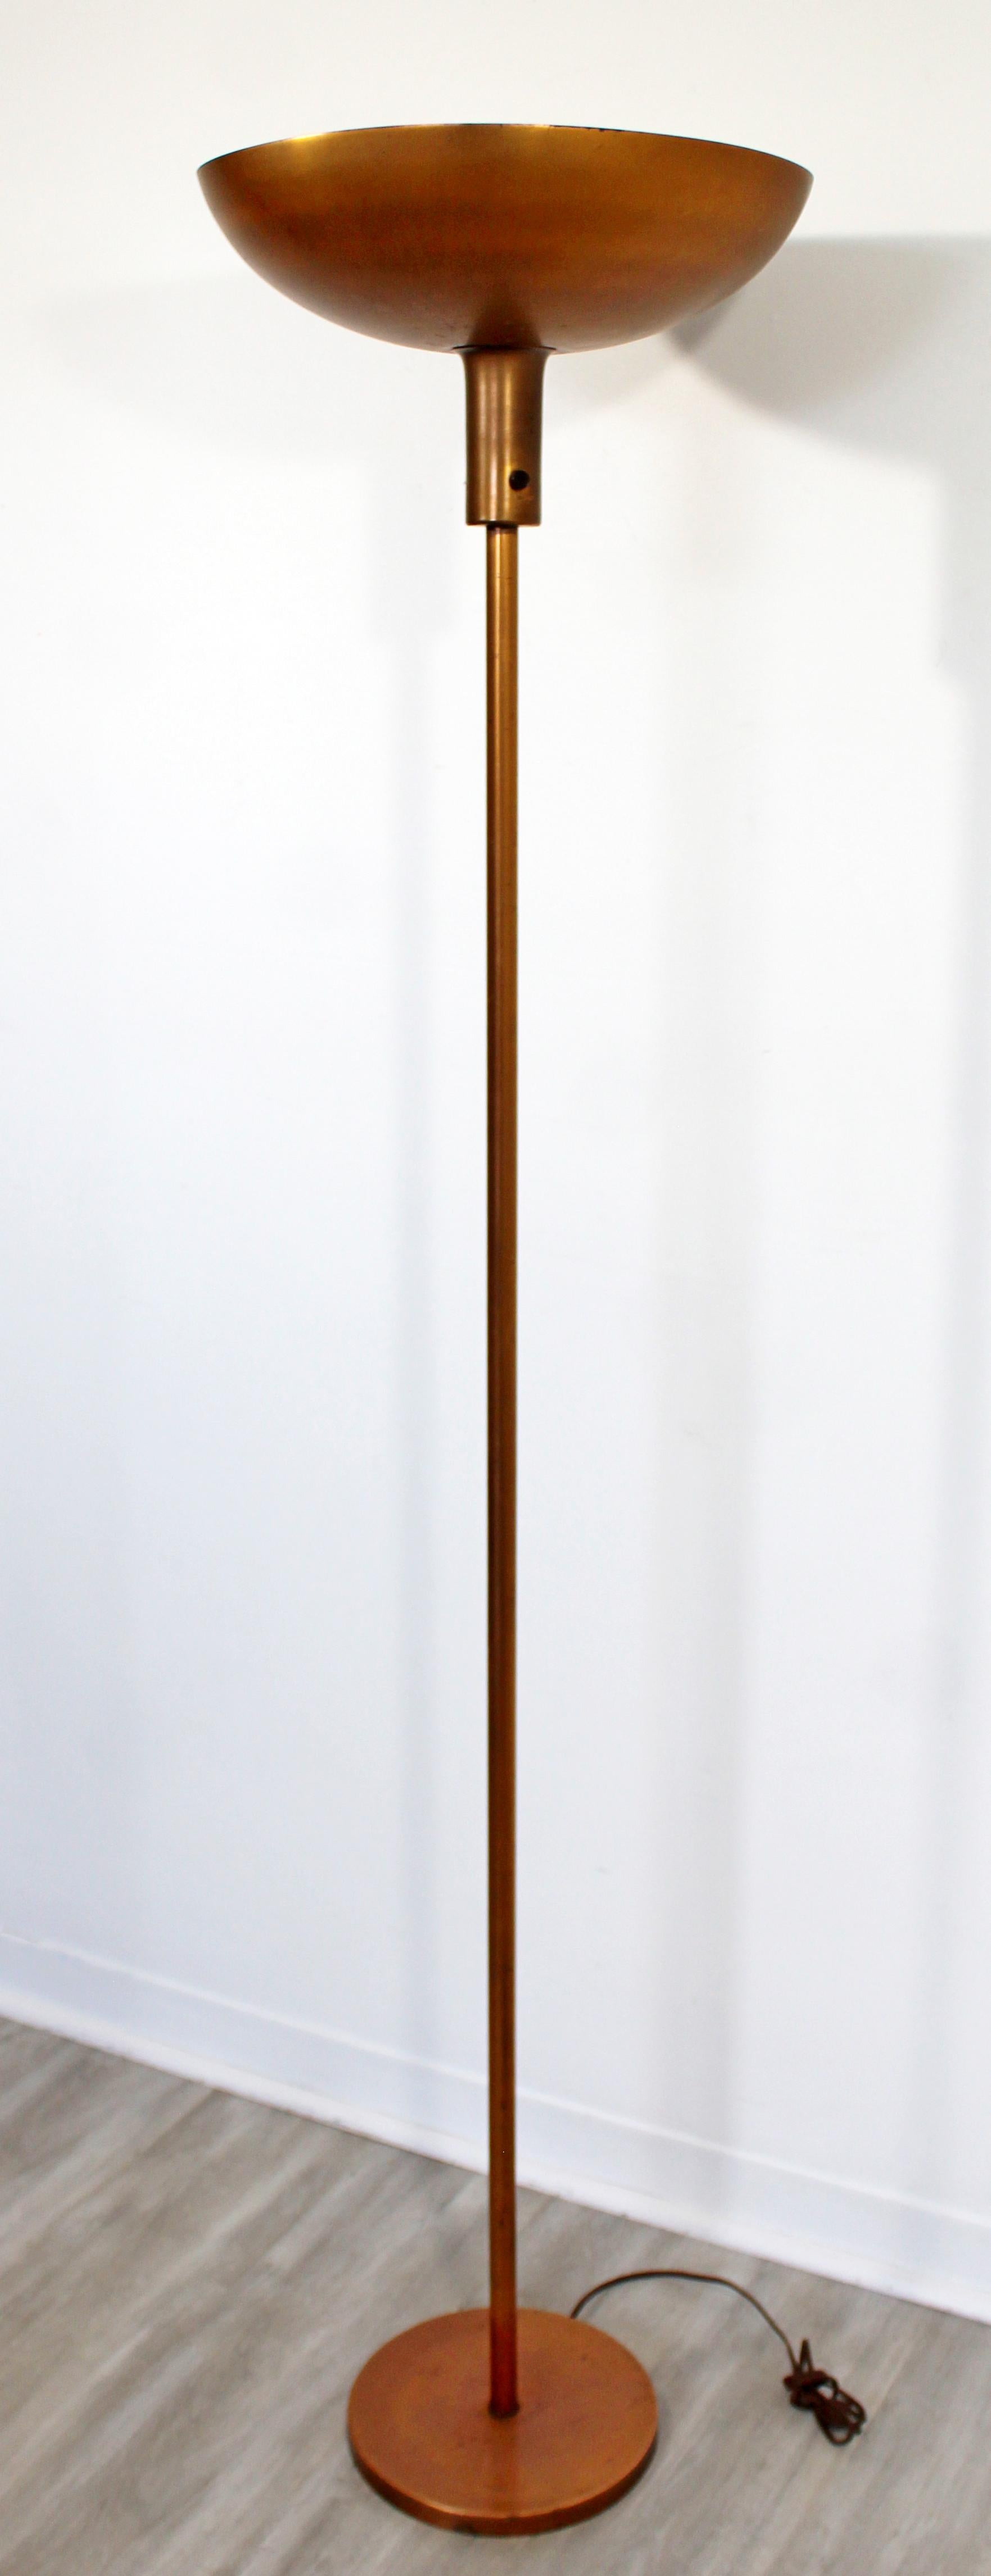 For your consideration is a gorgeous, original, uplight floor lamp, made of copper, circa 1940s. In very good vintage condition. The dimensions are 15.5